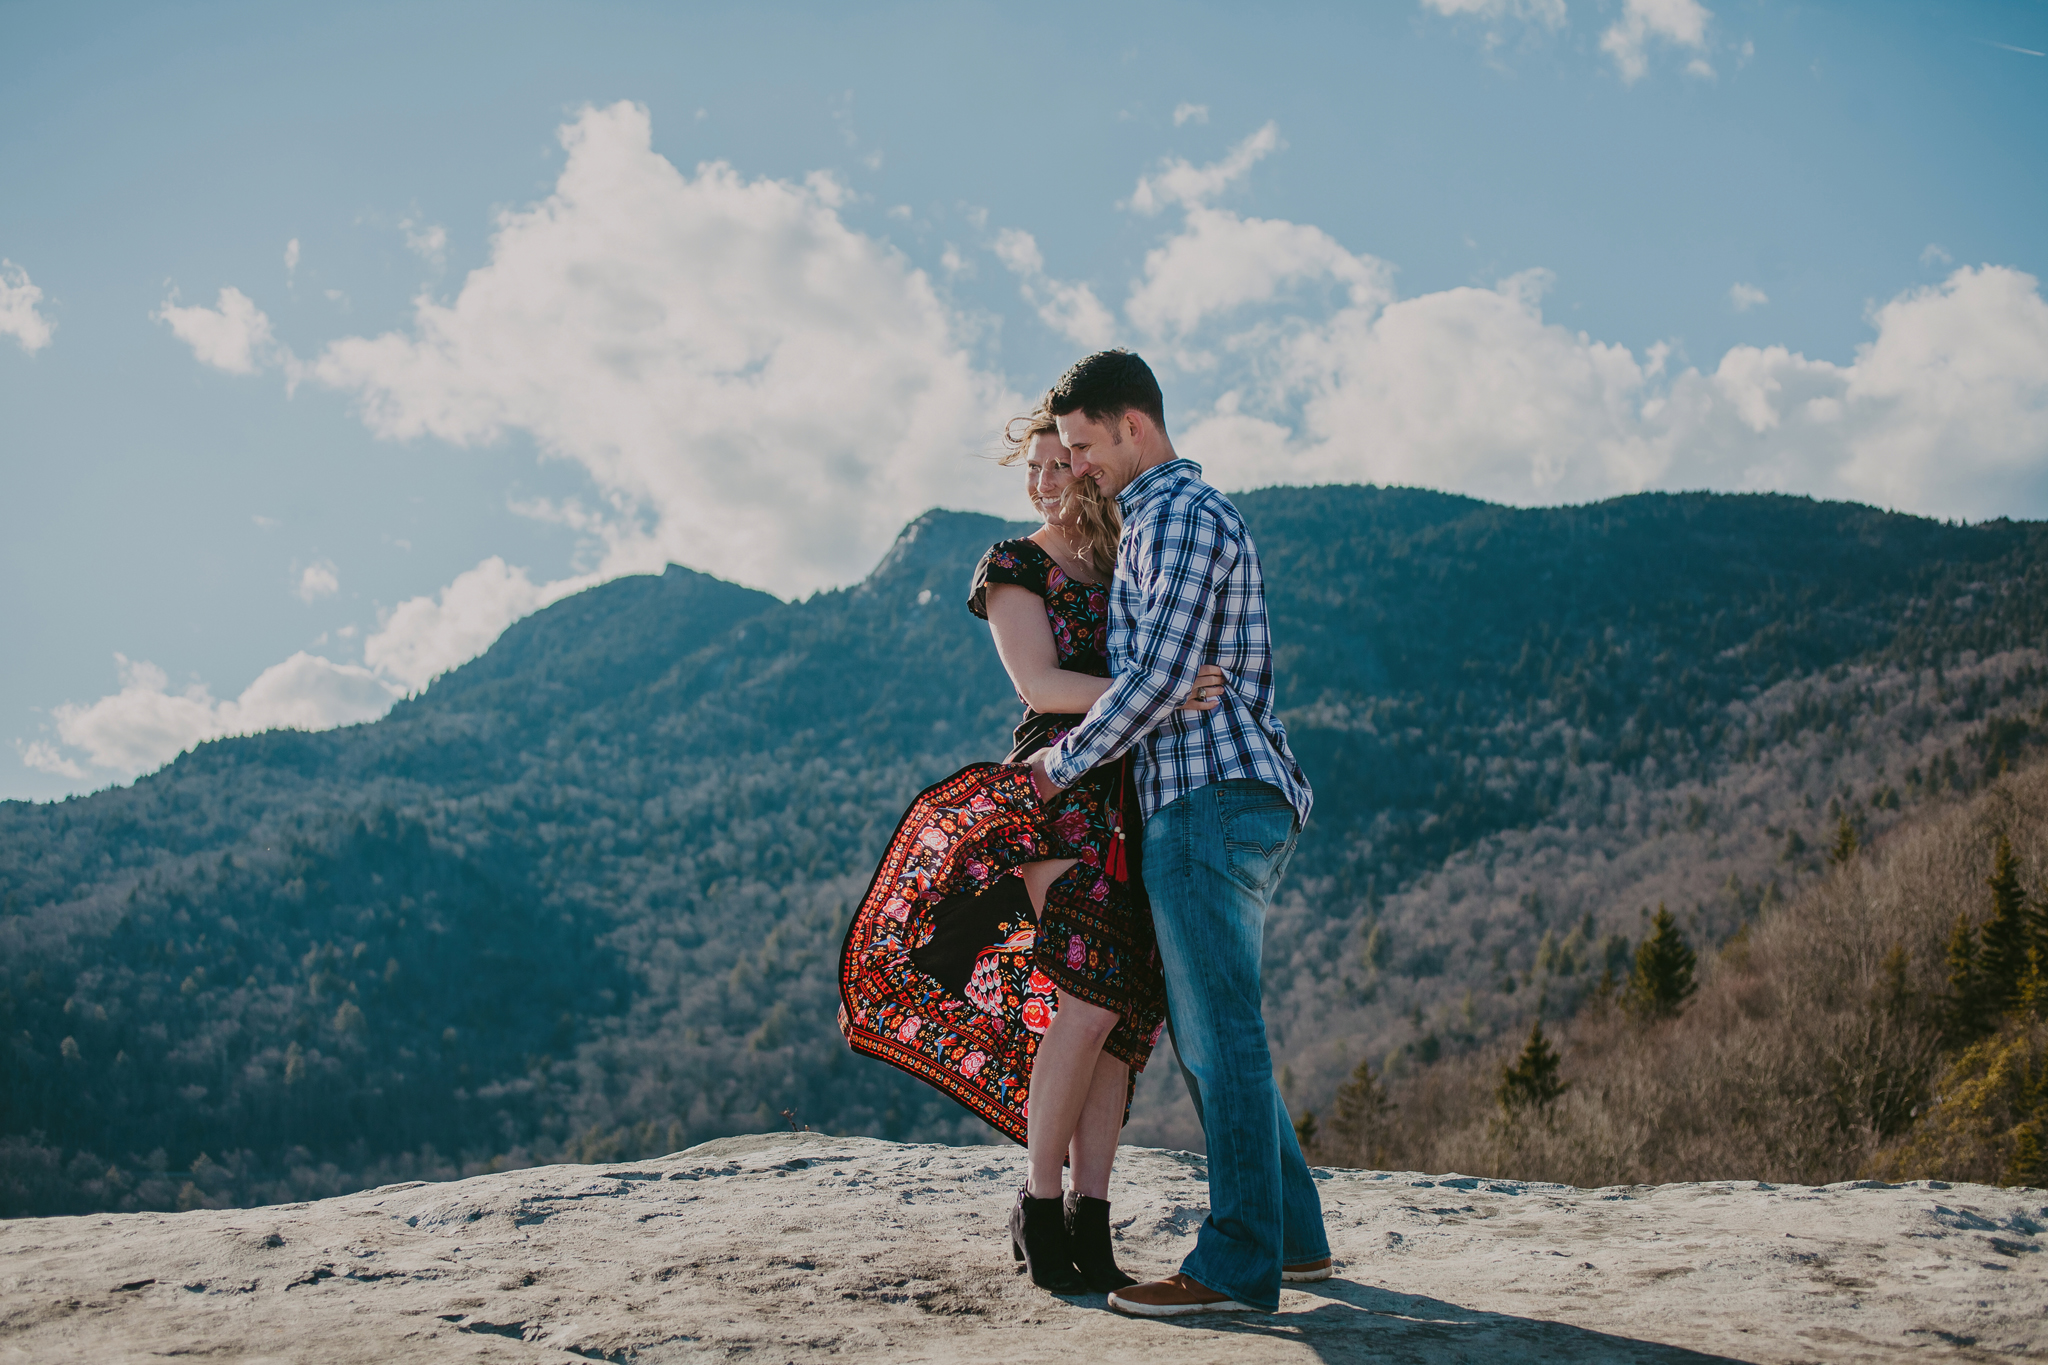 The wind blows bride's dress during their mountain engagement session on the blue ridge parkway photos by Mabyn Ludke Photography